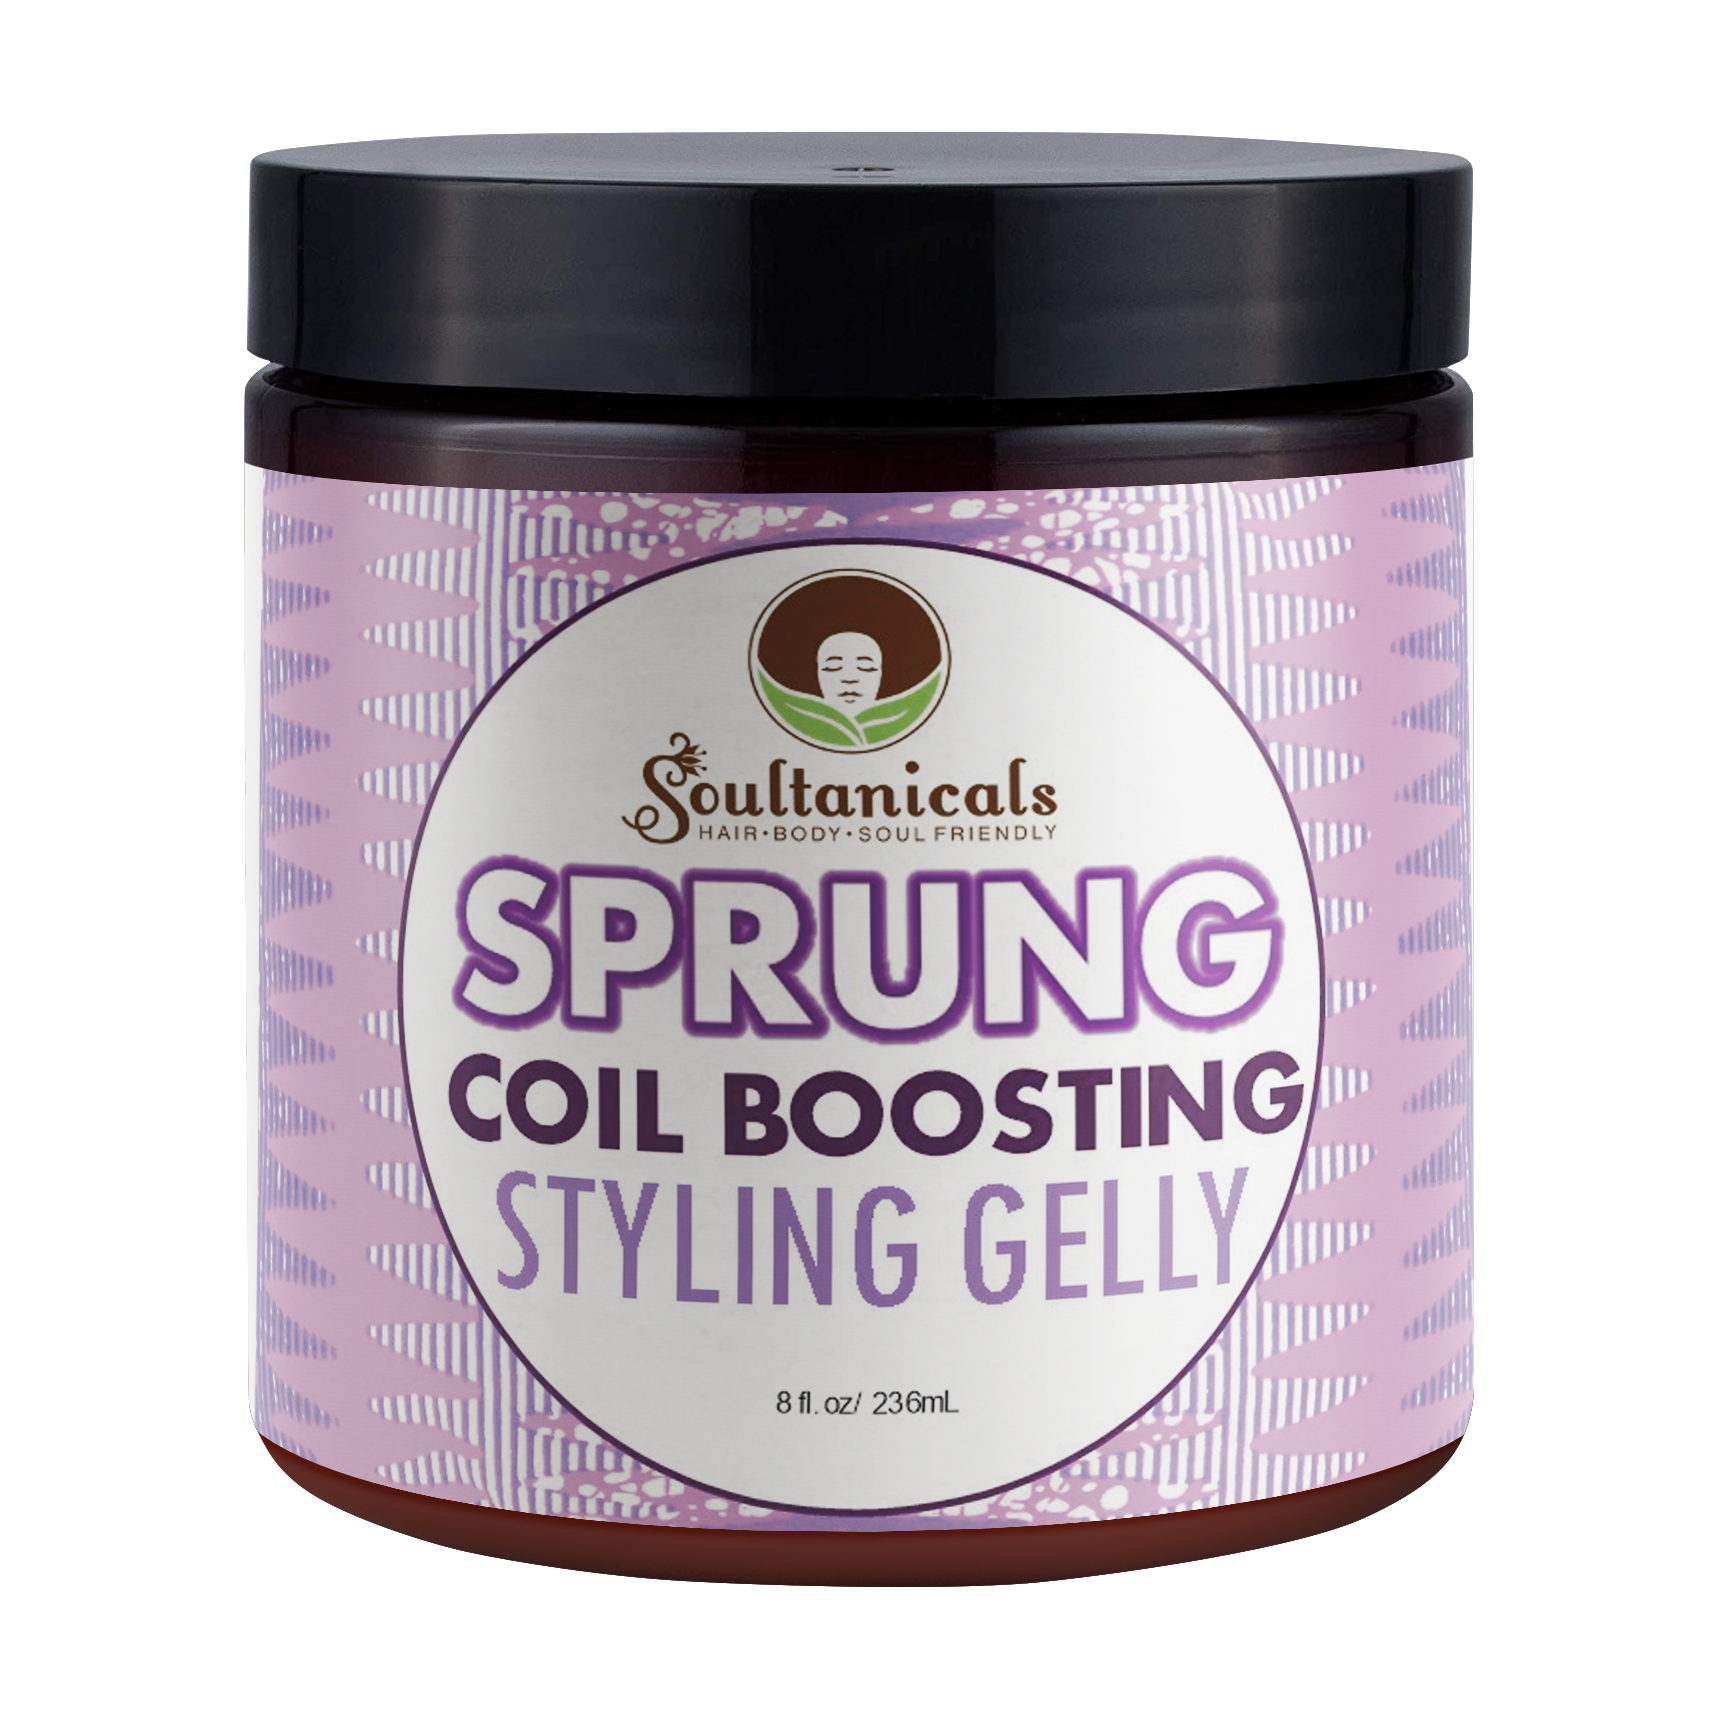 Soultanicals SPRUNG Coil Boosting Styling Gelly